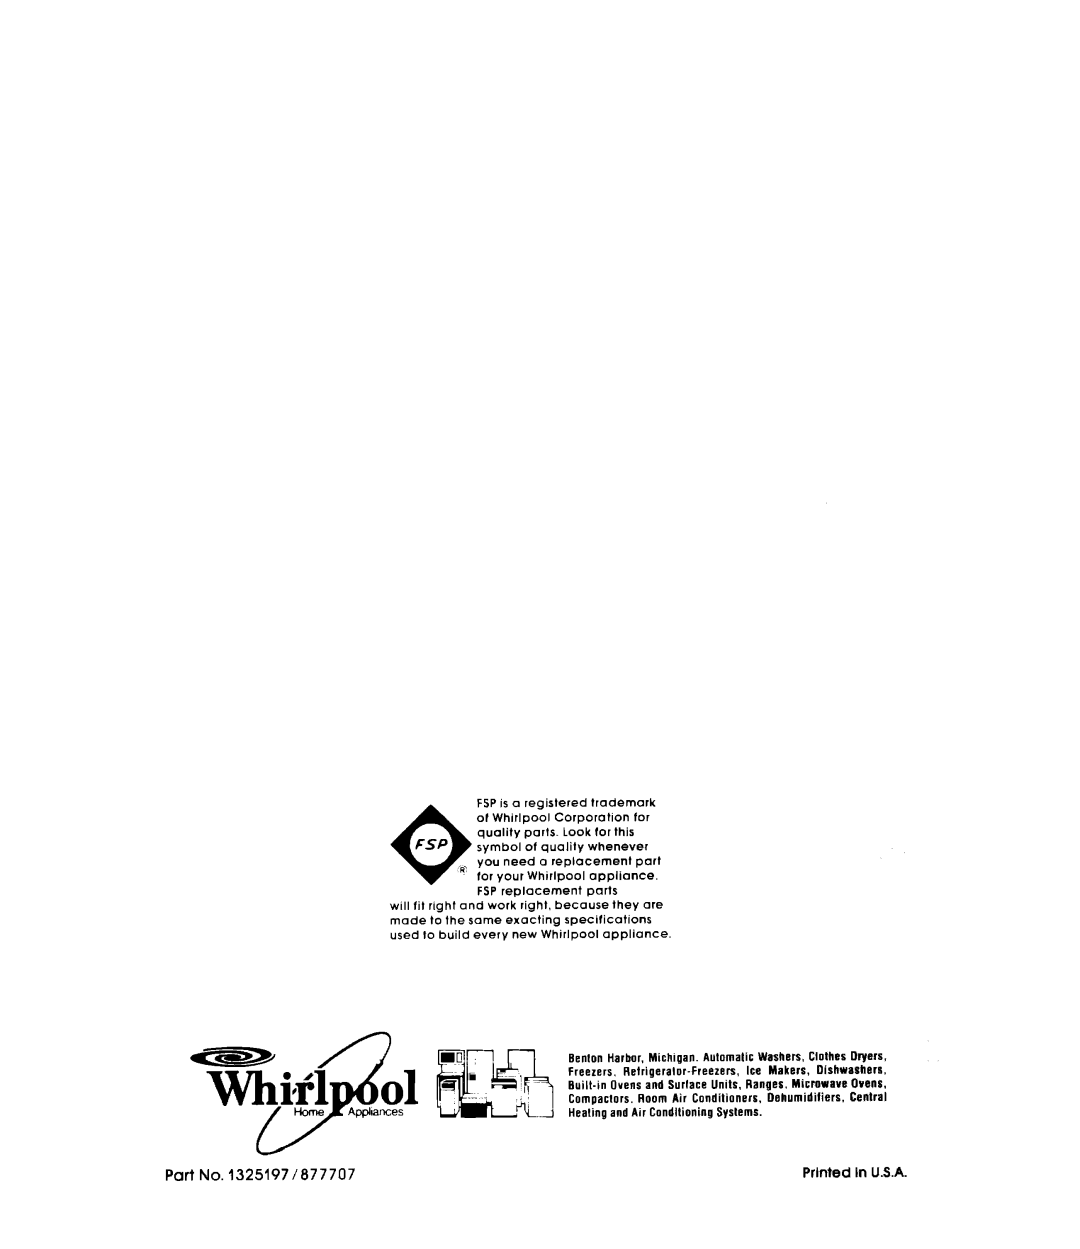 Whirlpool RS576PXL manual Part No. 1325197/877707, Prlrtted In U.S.A 